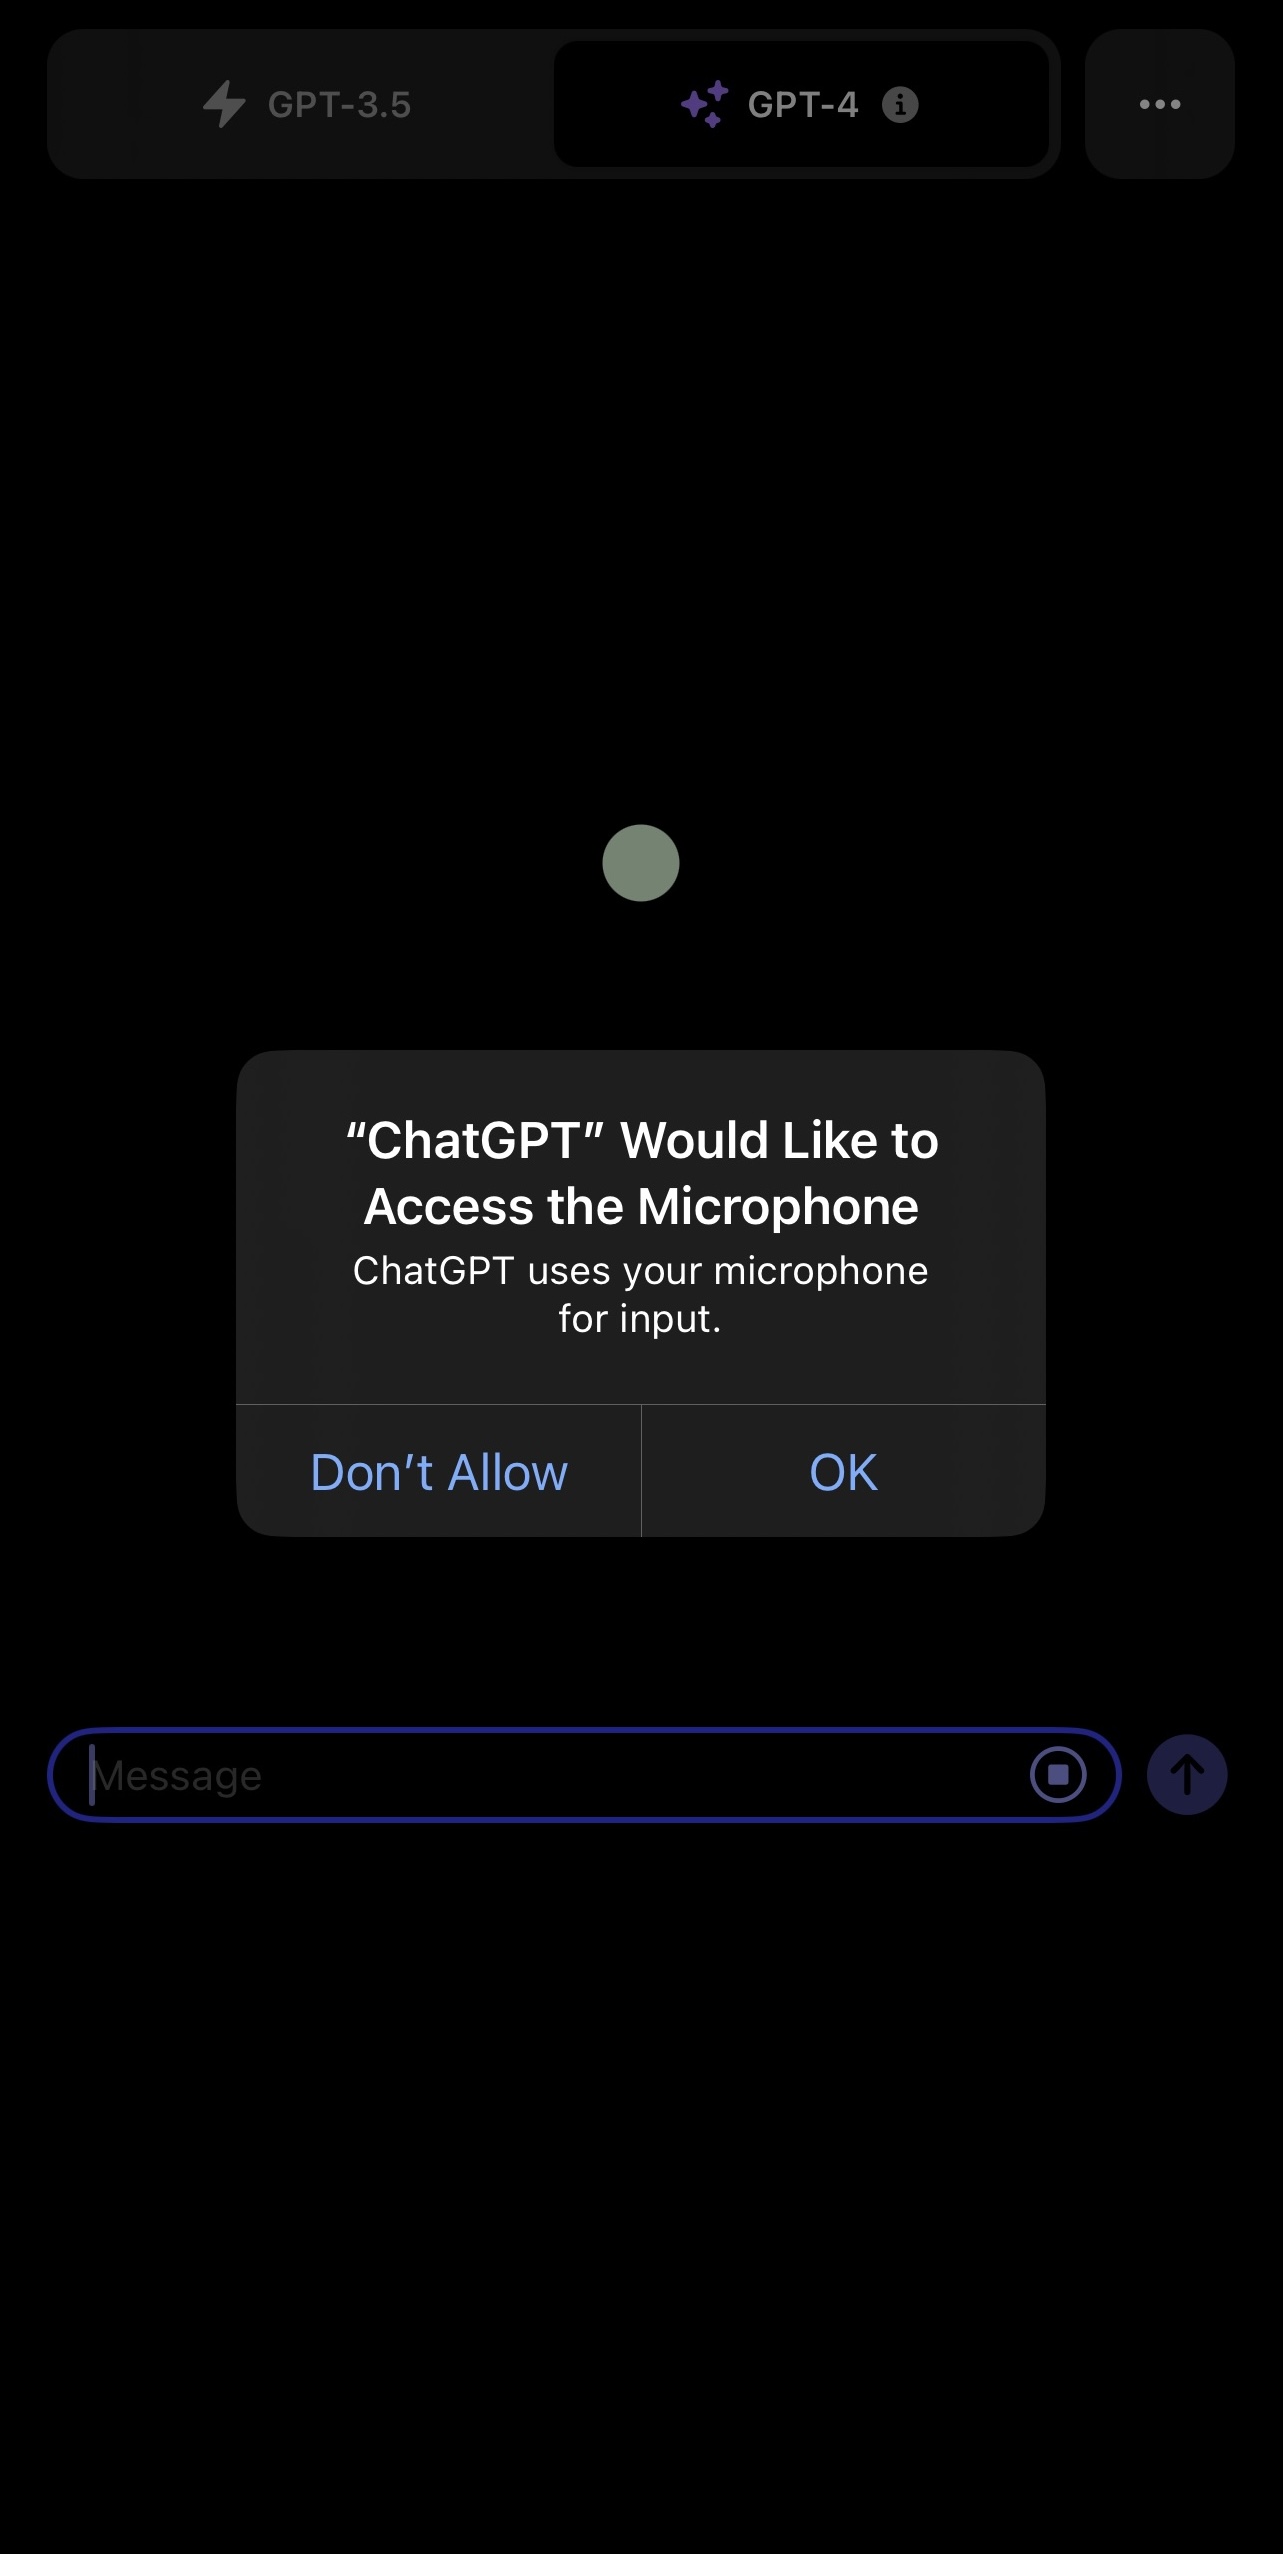 official openai chatgpt app ios iphone 10 6466721d38ad4 sej - A Look Inside The New ChatGPT iPhone App From OpenAI